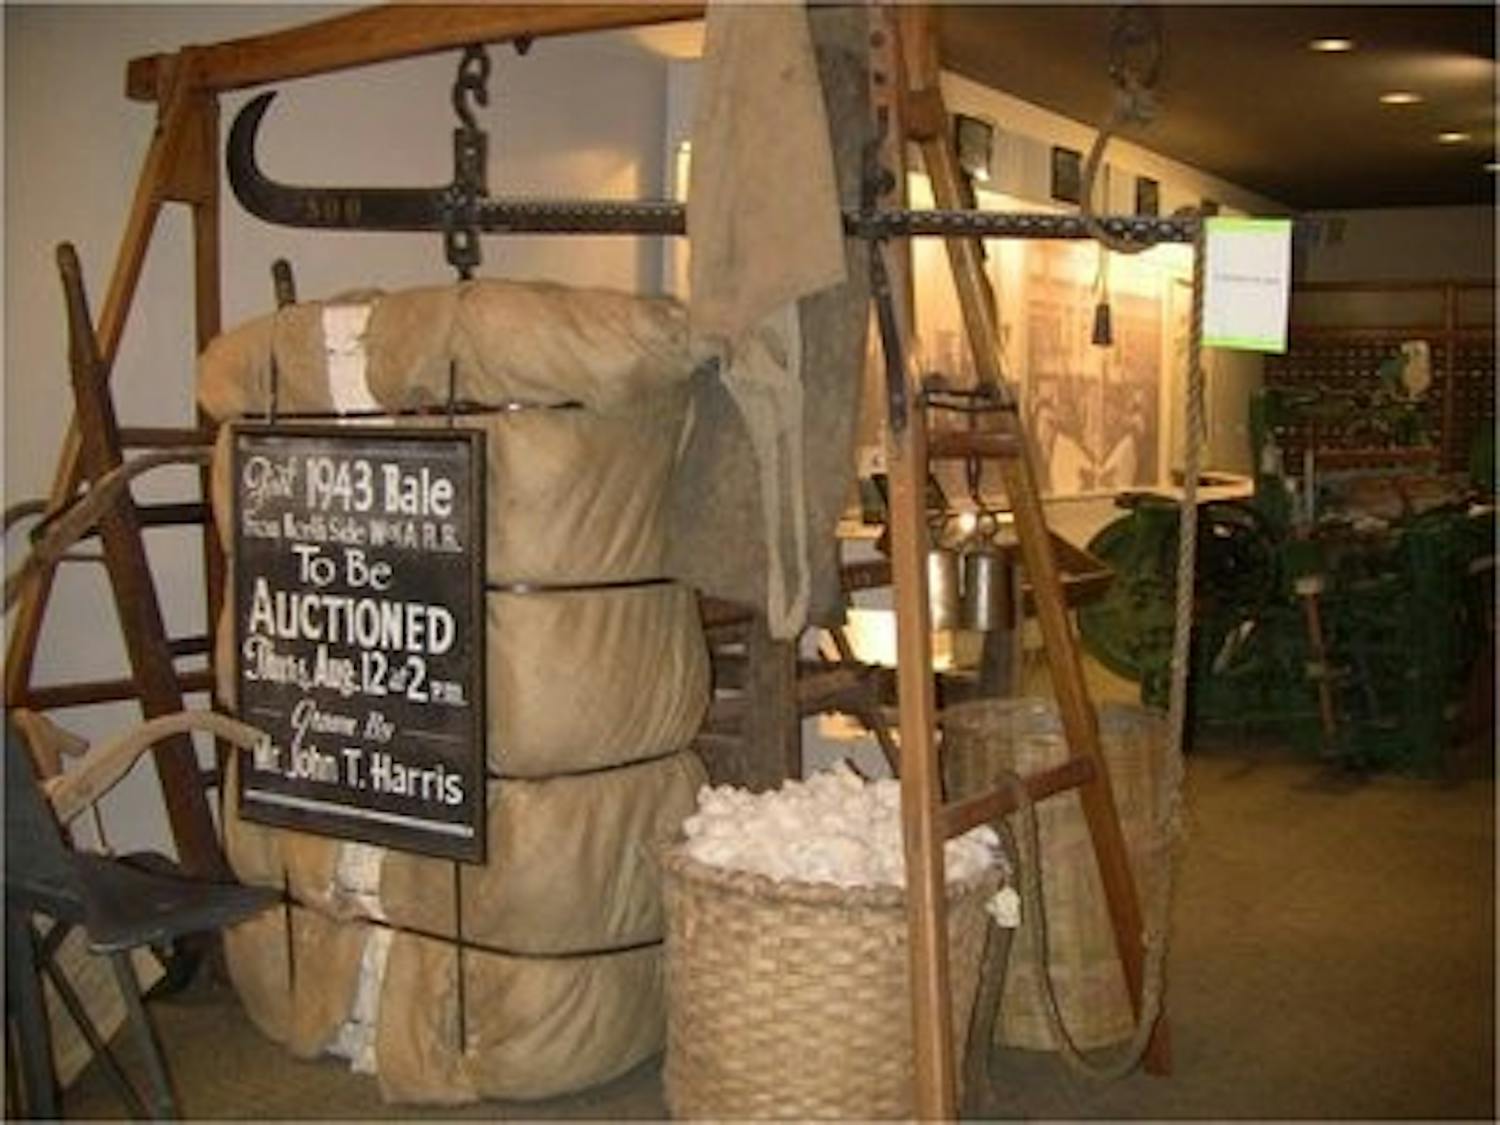 500 lb. bale of cotton and scale formerly owned by John T. Harris, one of the founders of the museum. (Nathan Simone / ONLINE EDITOR)